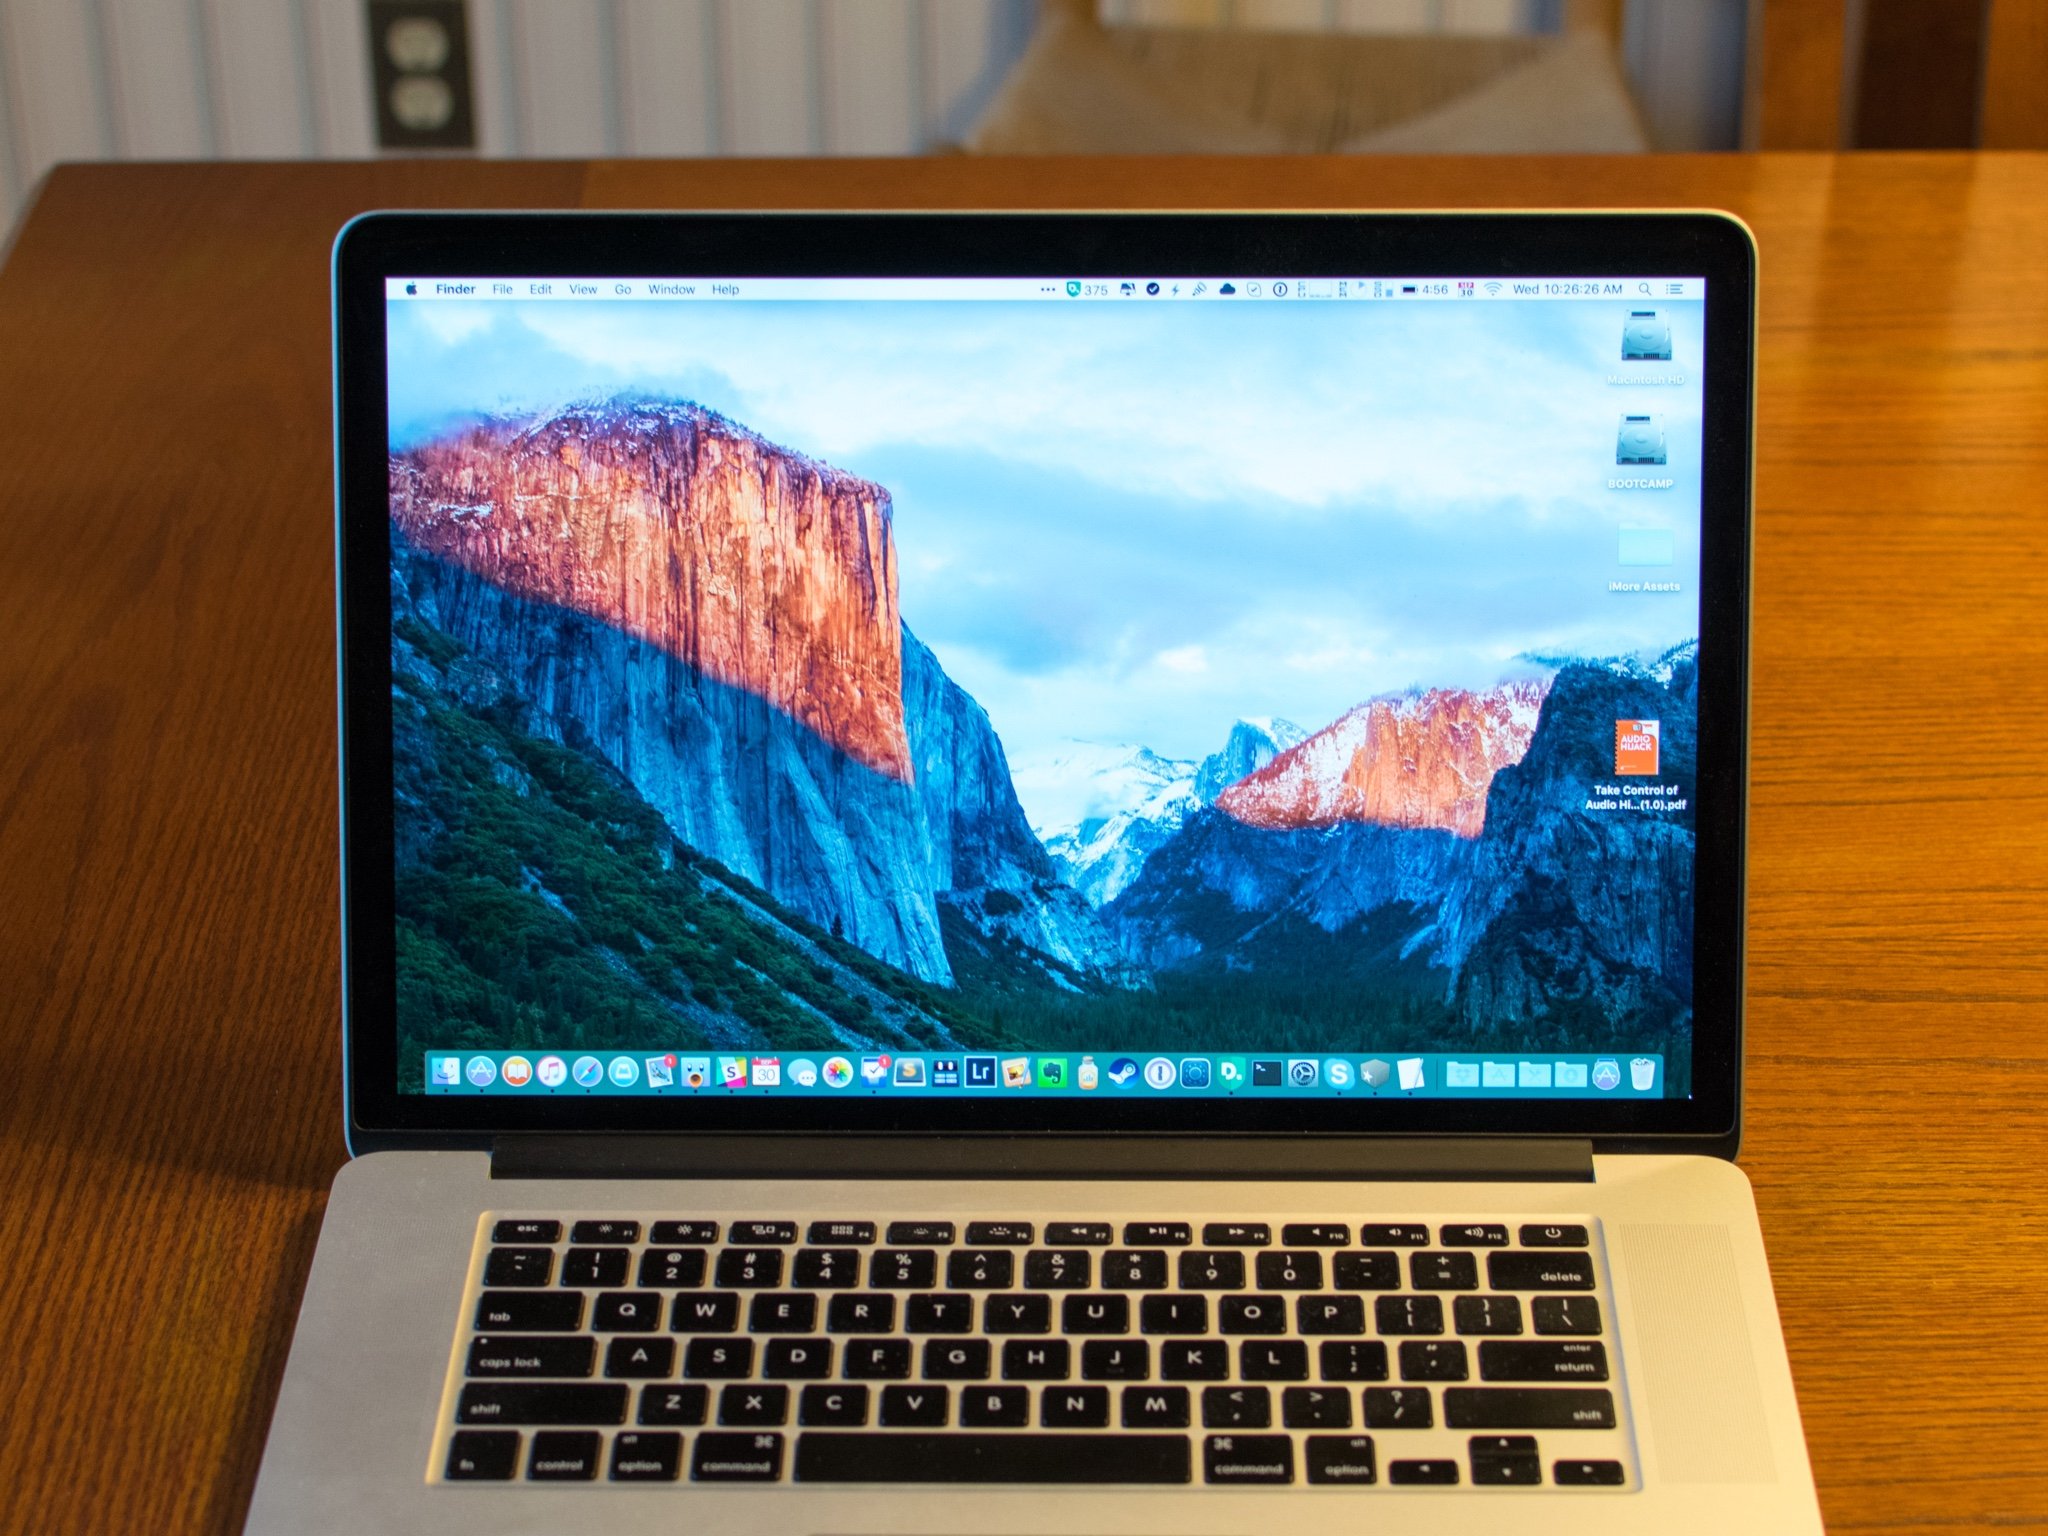 OS X El Capitan now available for download